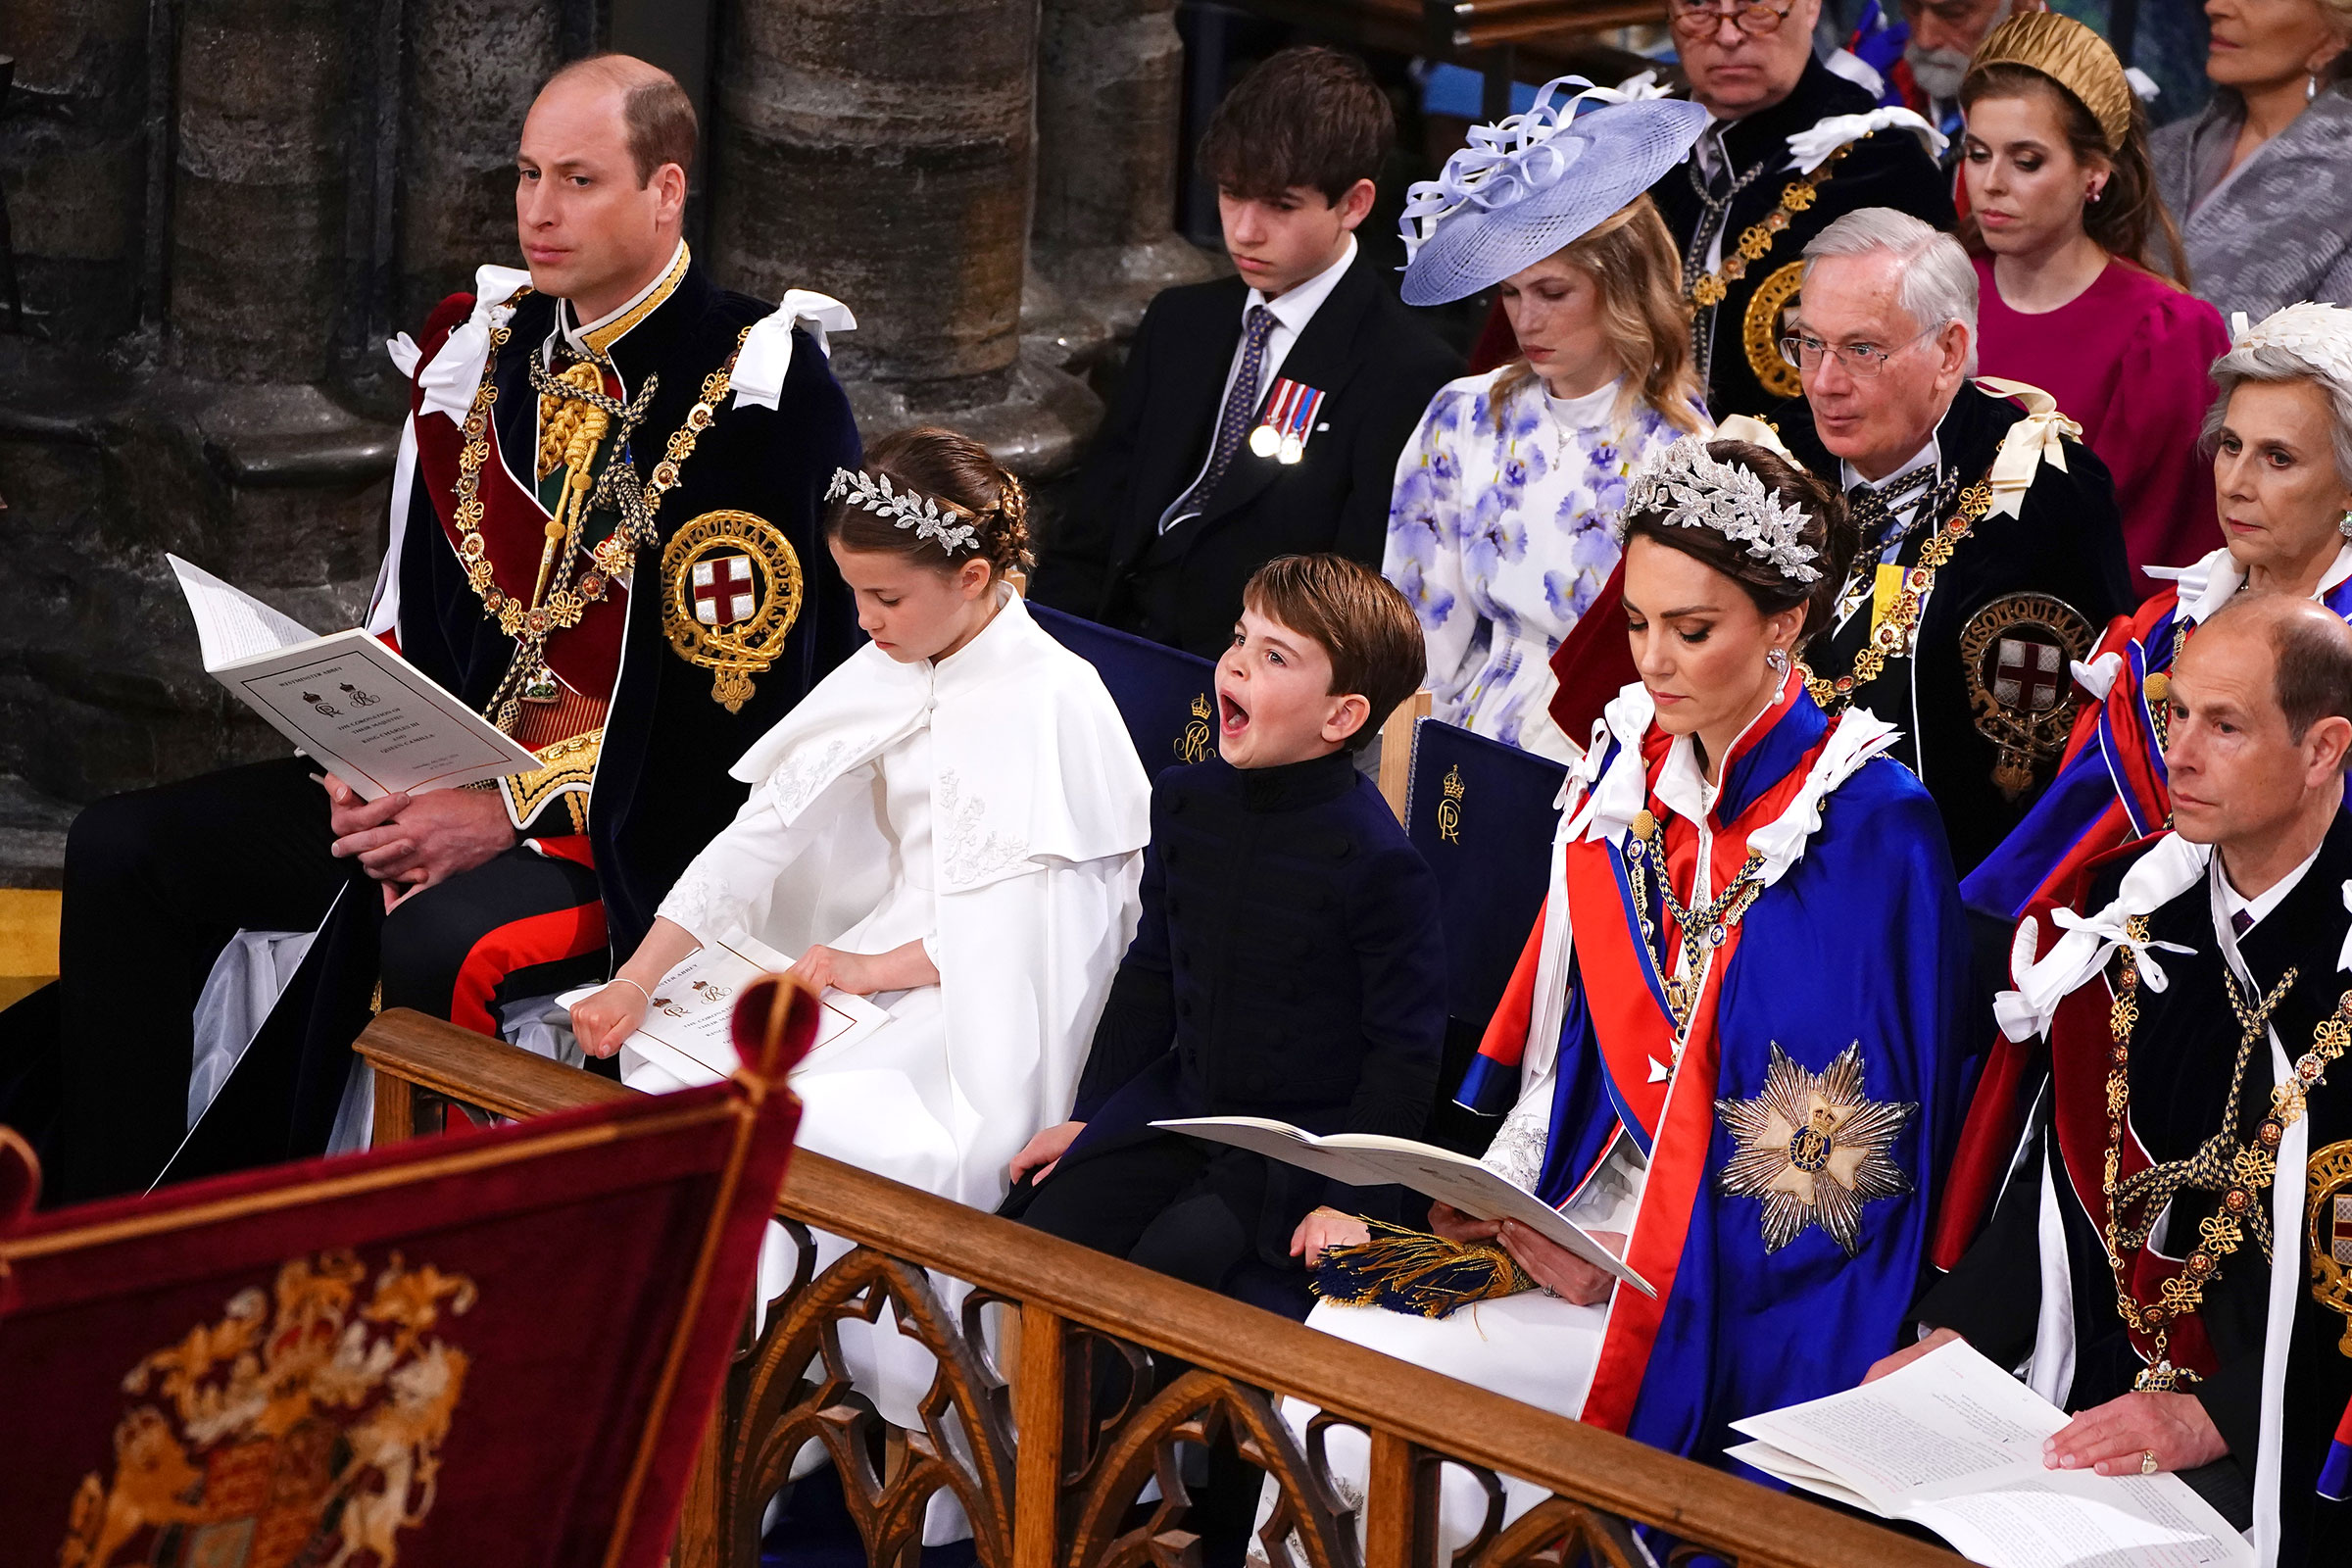 Prince Louis yawns during the coronation ceremony of King Charles III. (Yui Mok—WPA Pool/Getty Images)